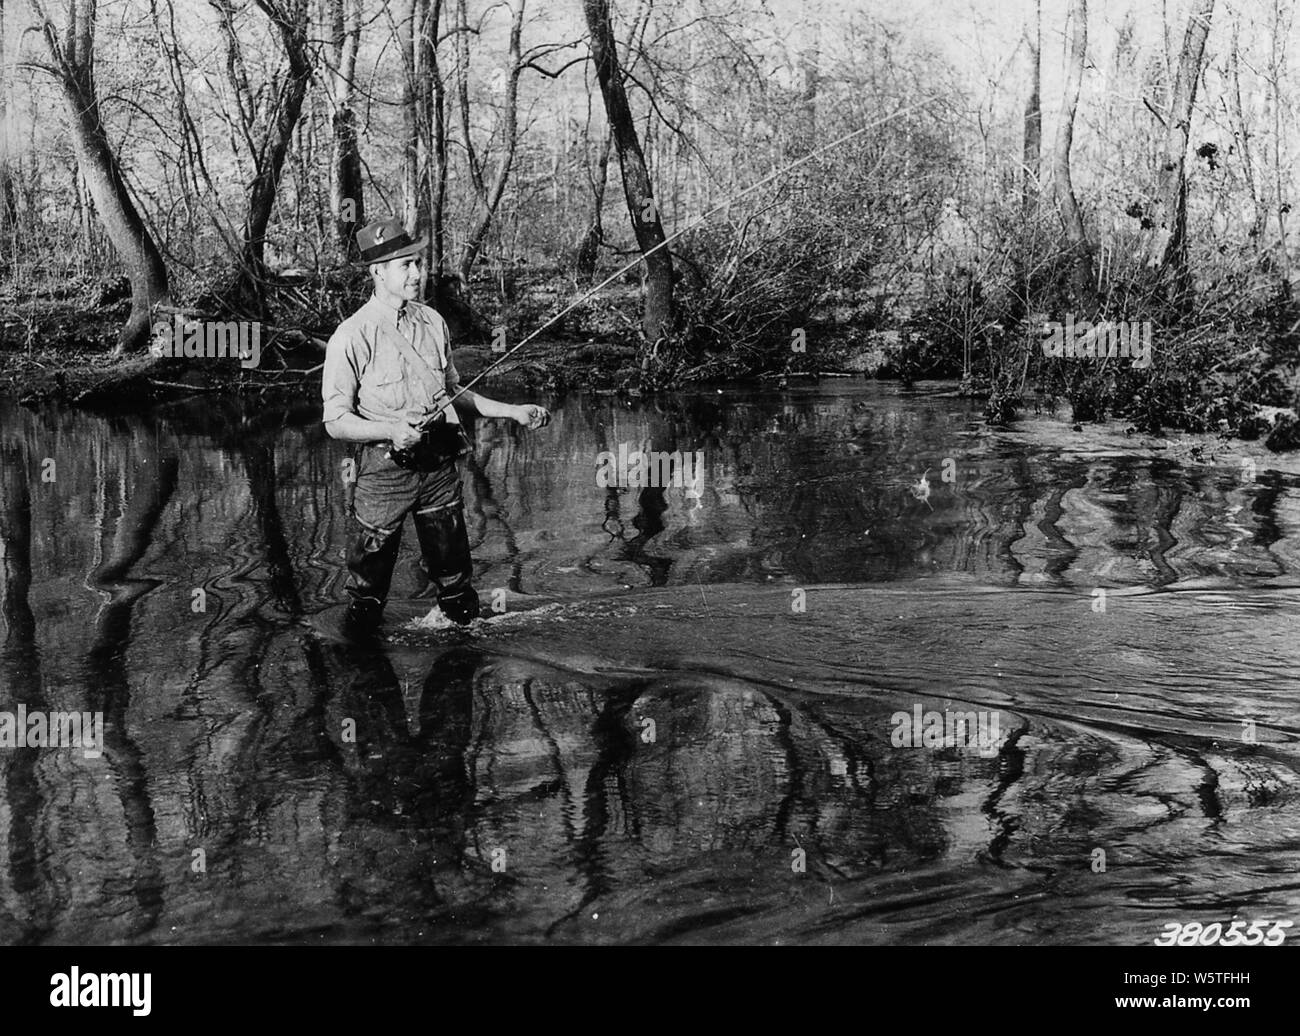 Stream fishing Black and White Stock Photos & Images - Alamy